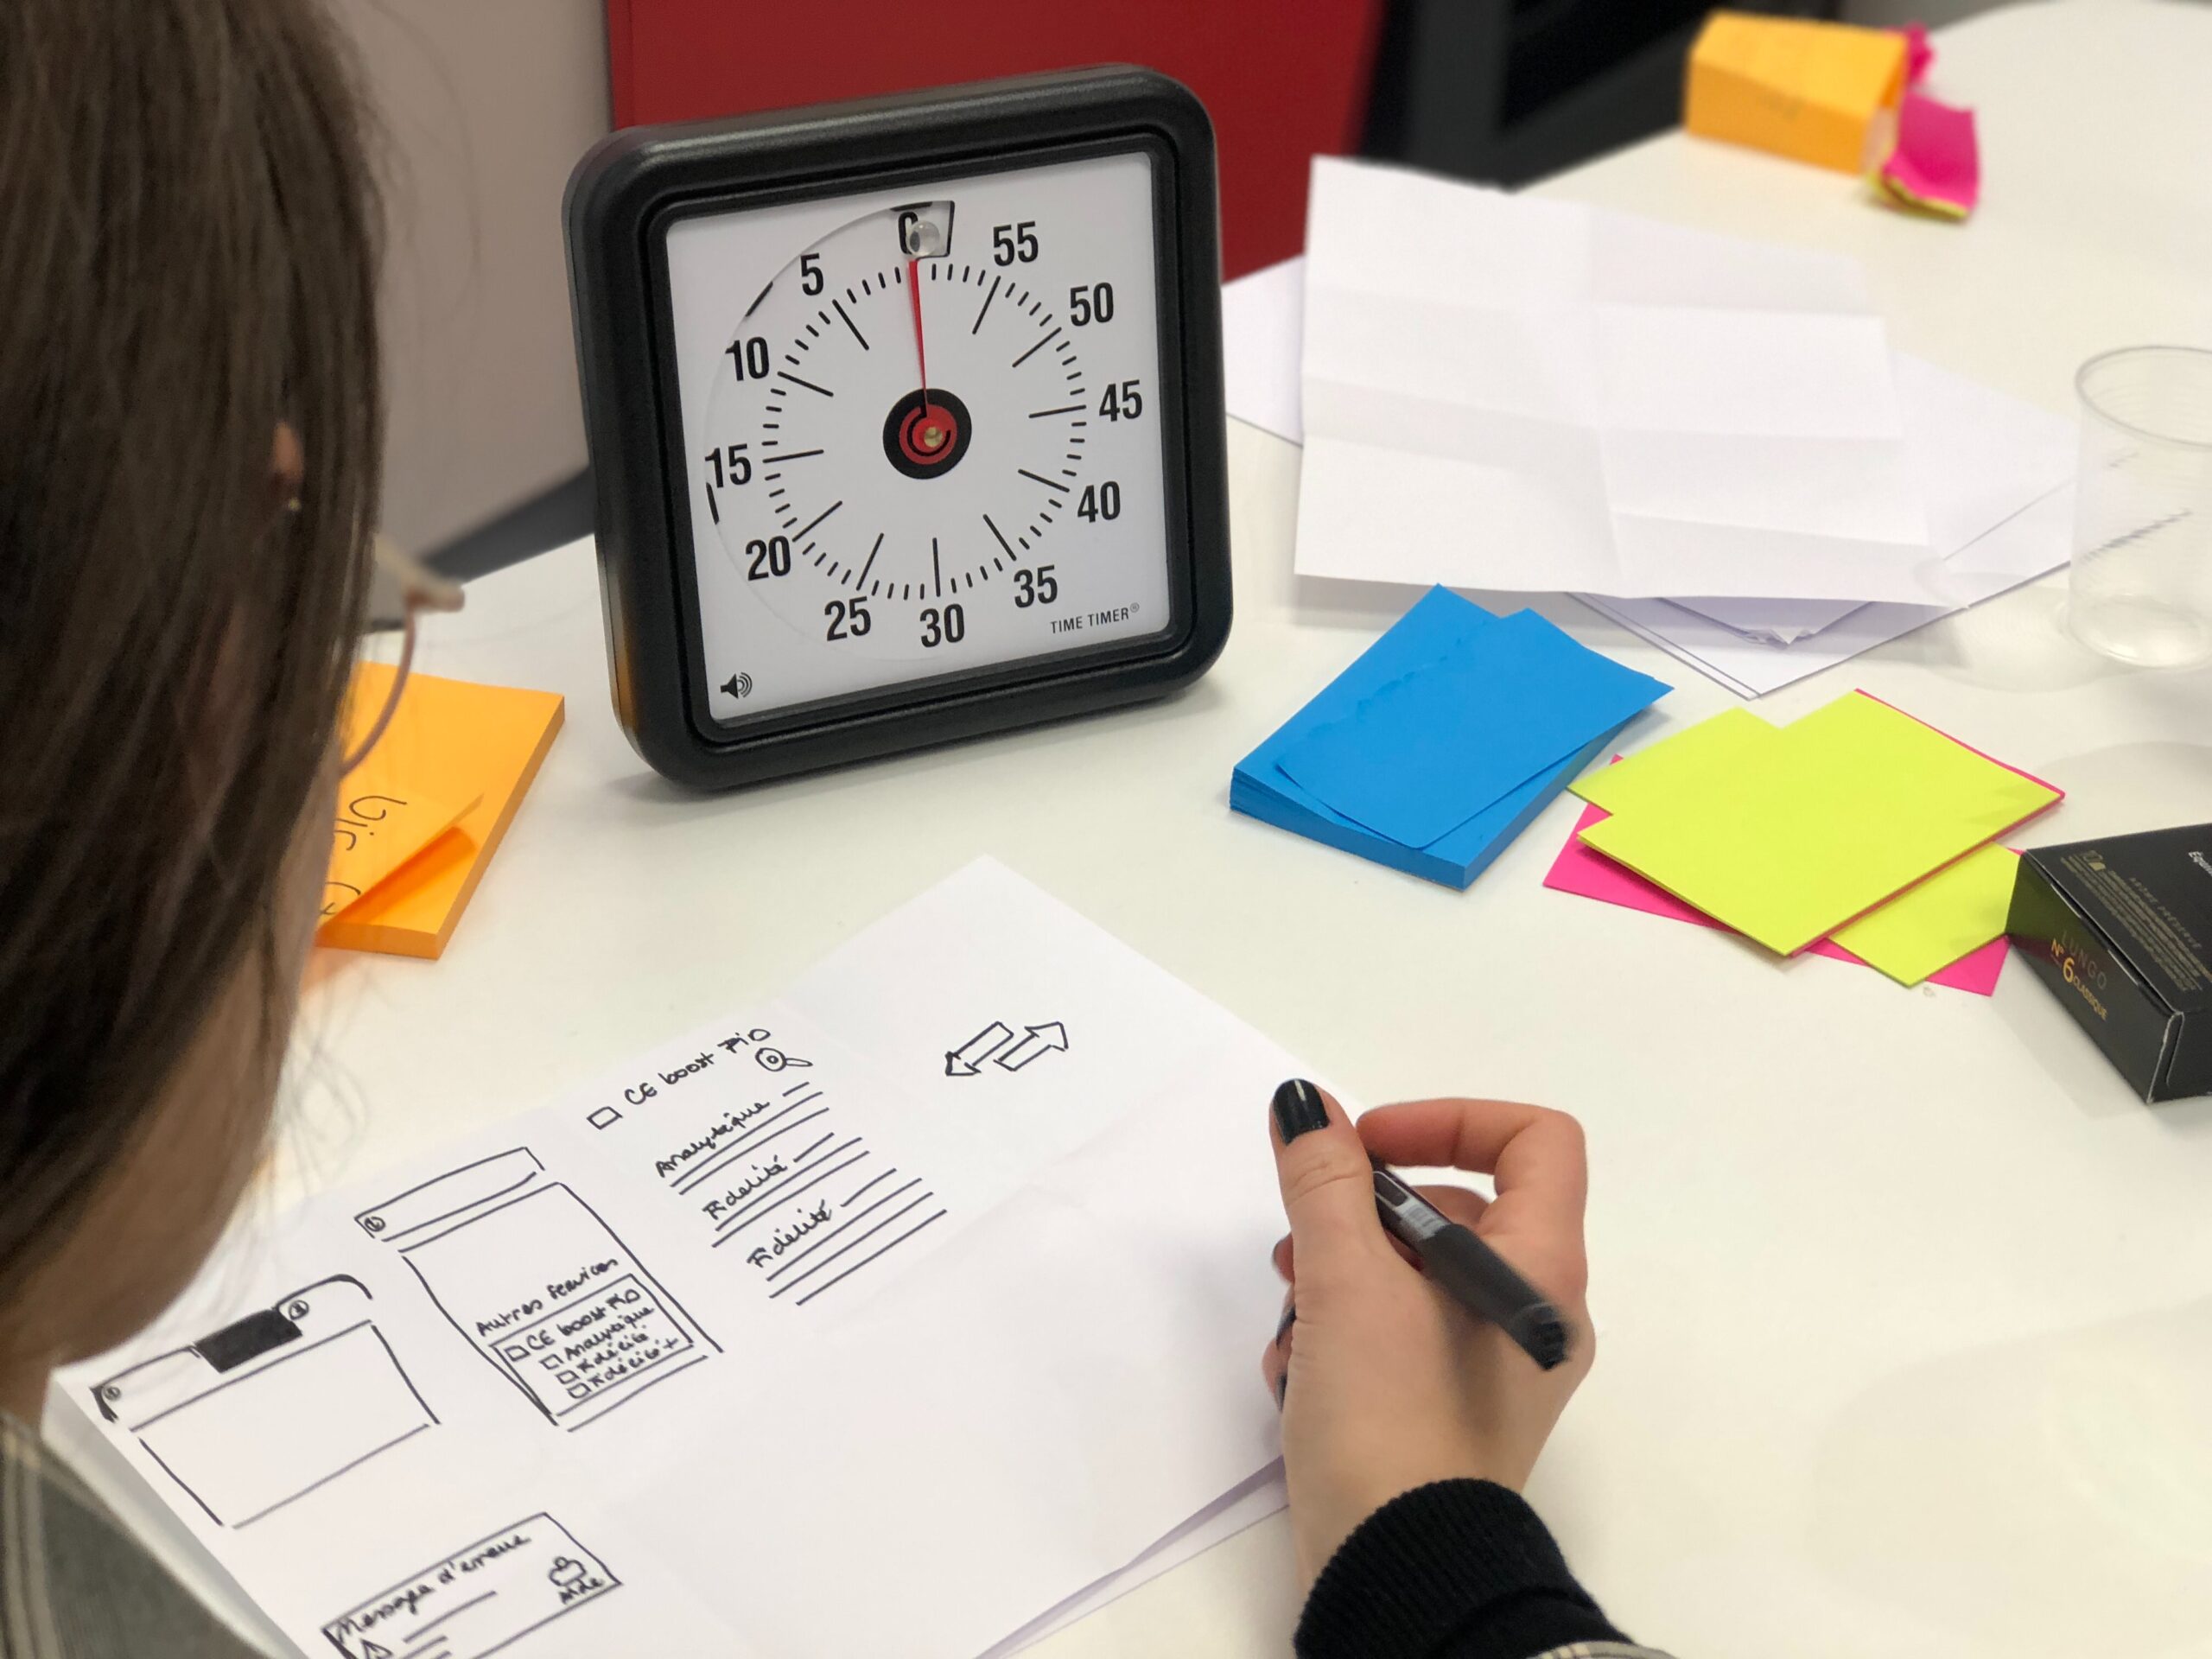 A team works during a design sprint with a clock in front of them